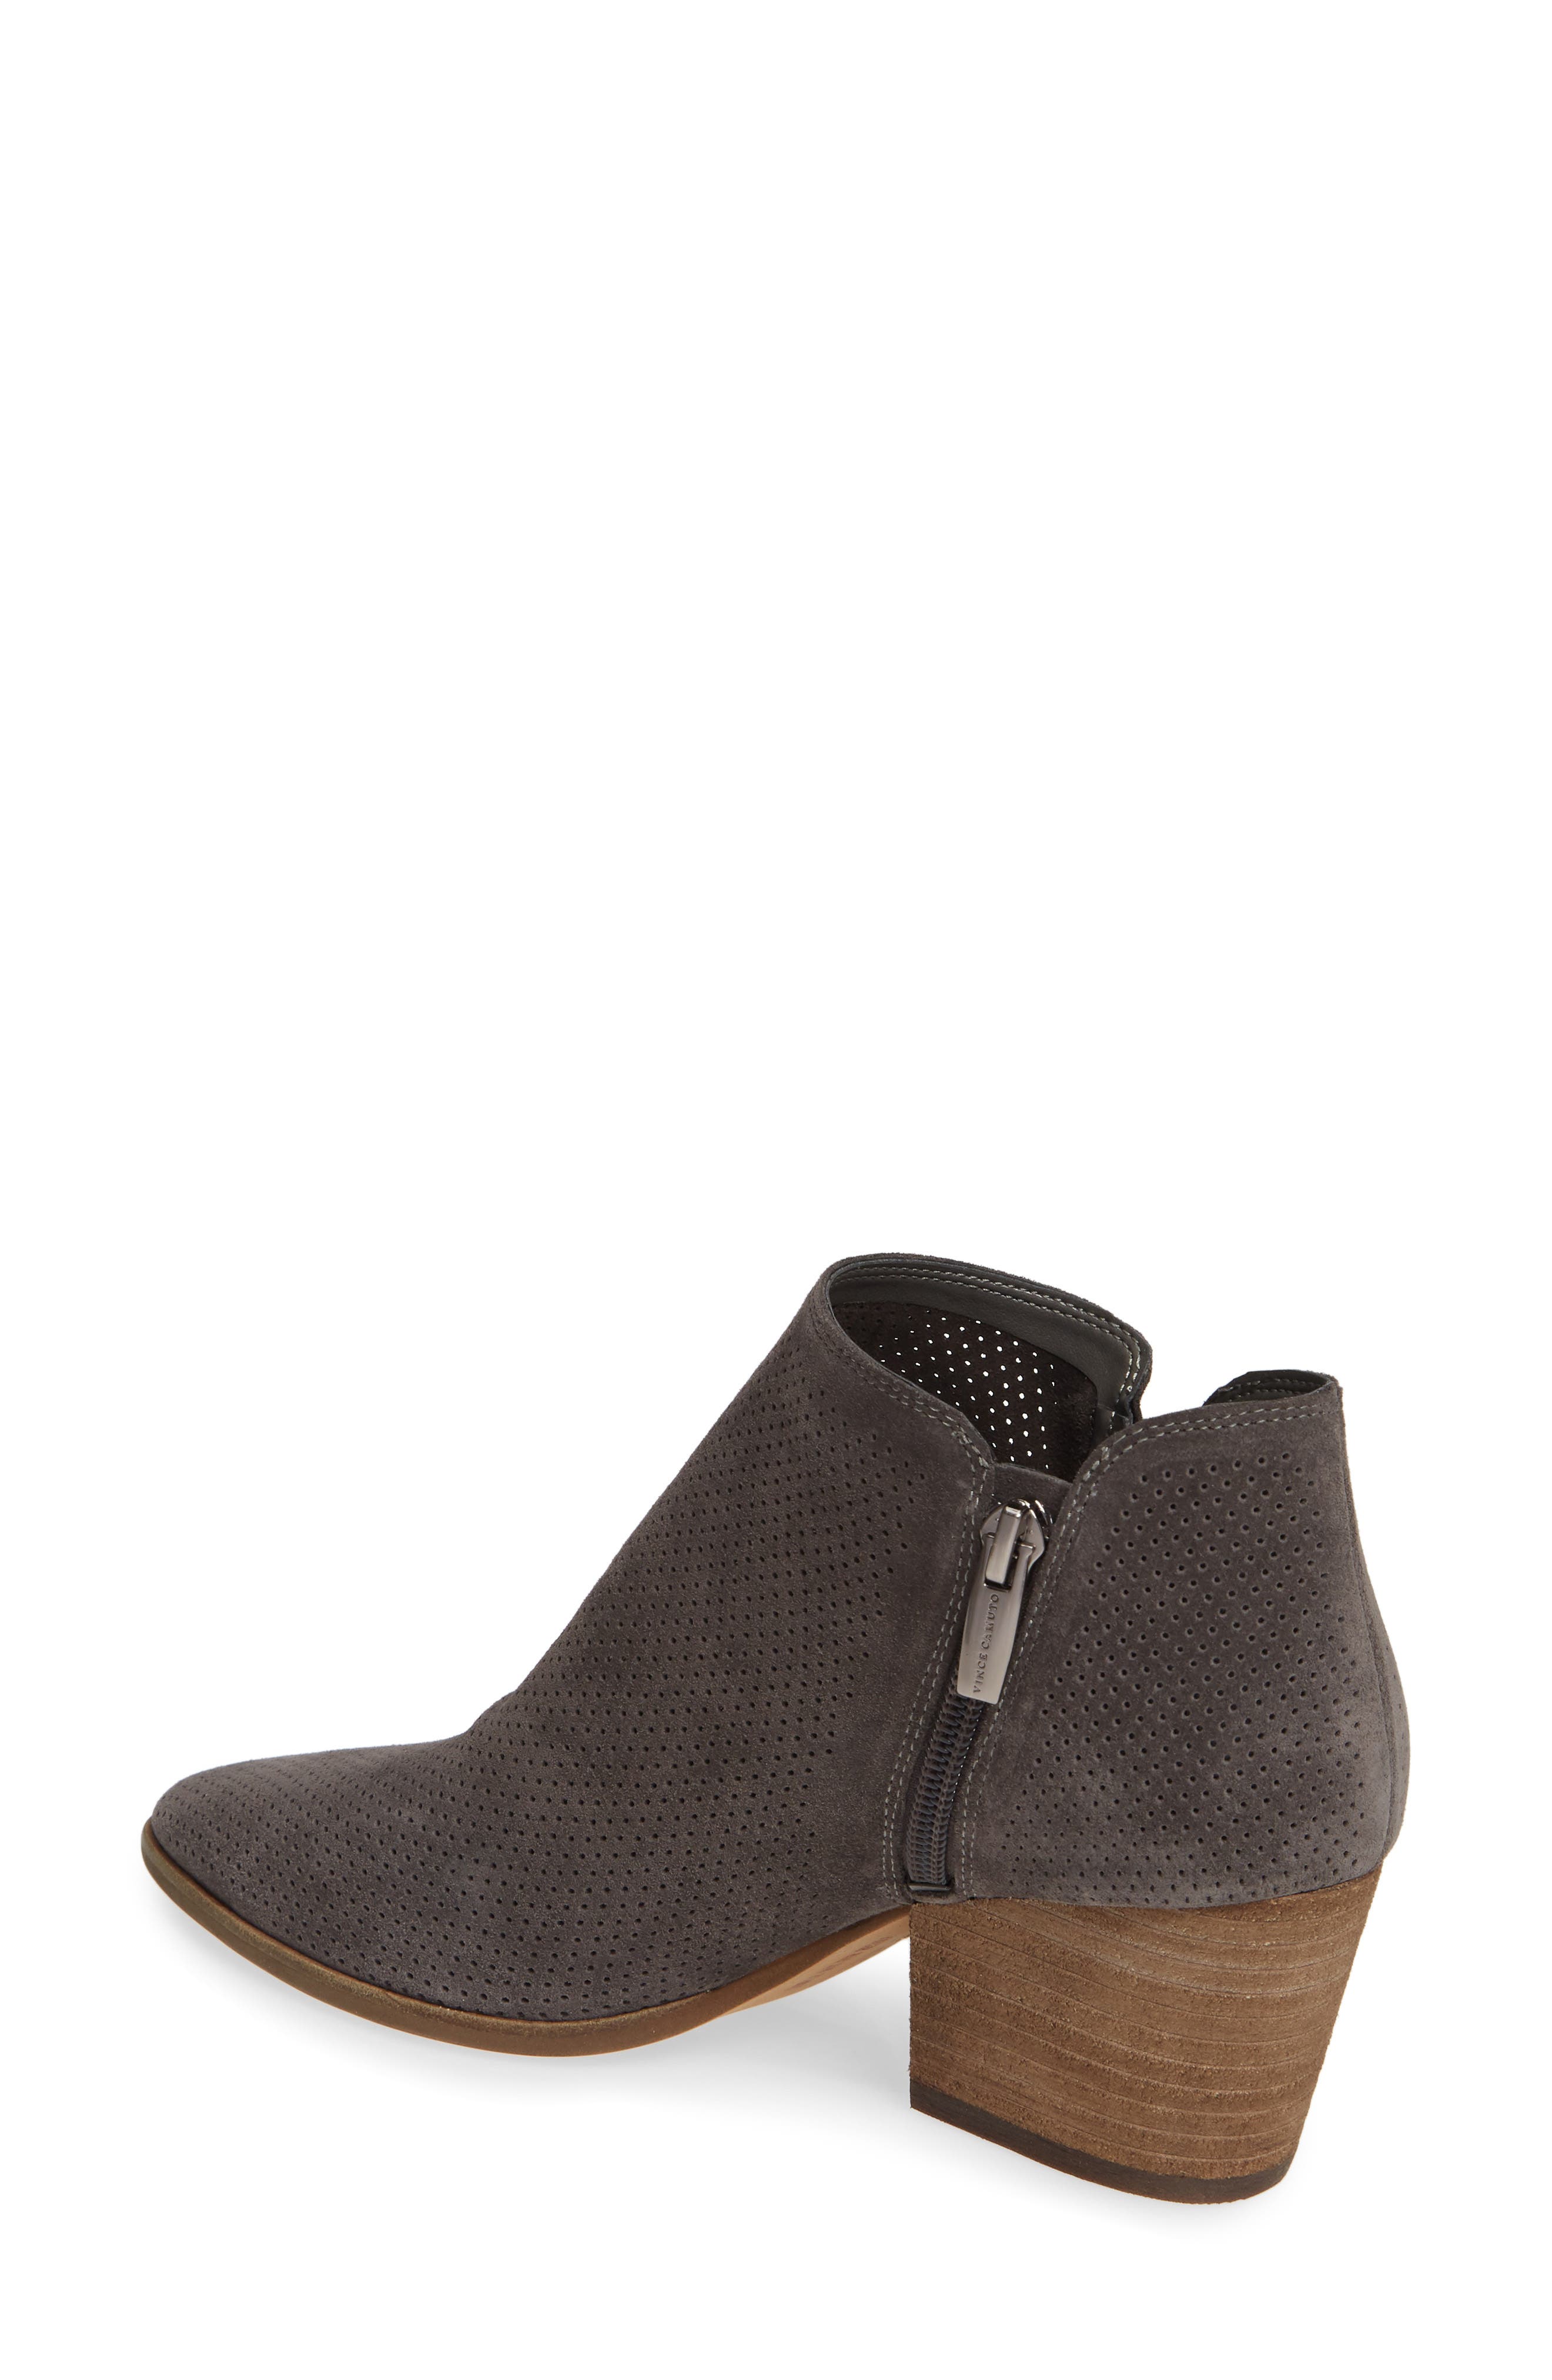 nethera perforated bootie vince camuto